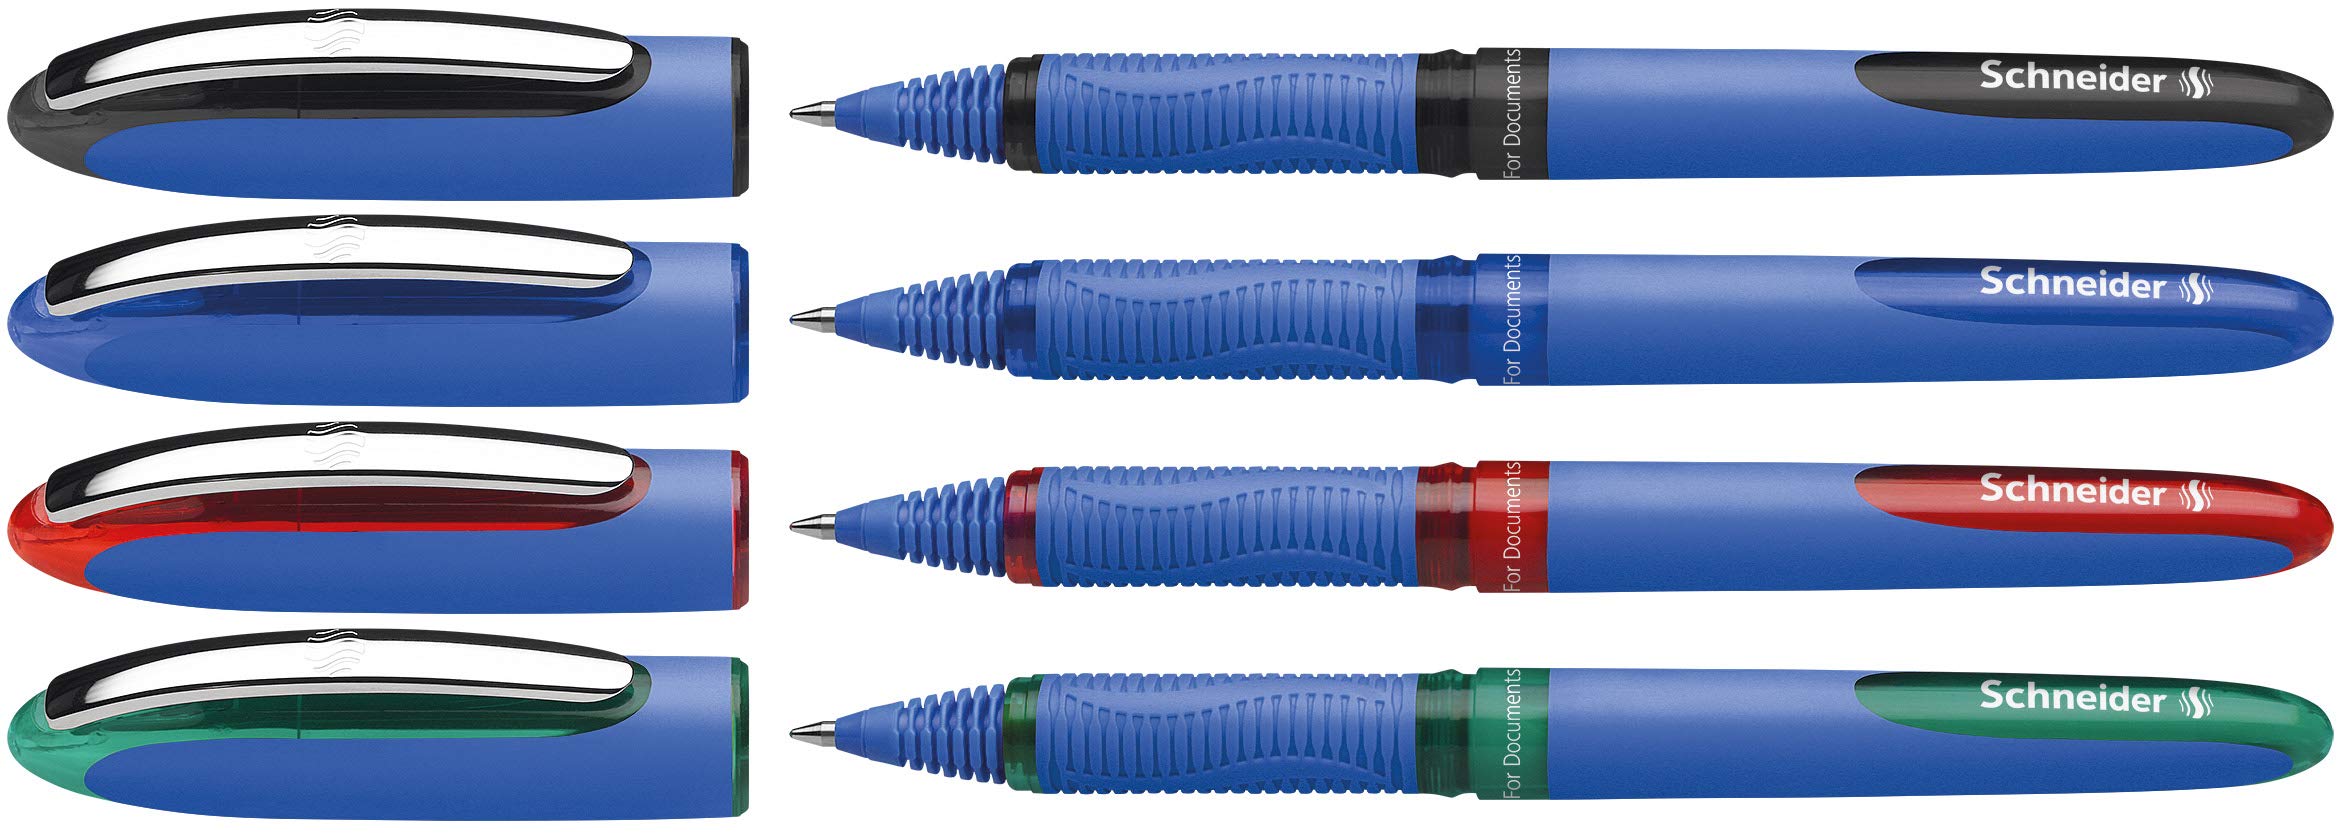 Schneider C products One Hybrid 03 Rollerball Pen Hybrid conical tip, 0.3 MM, assorted colours, Pack of 4 Case